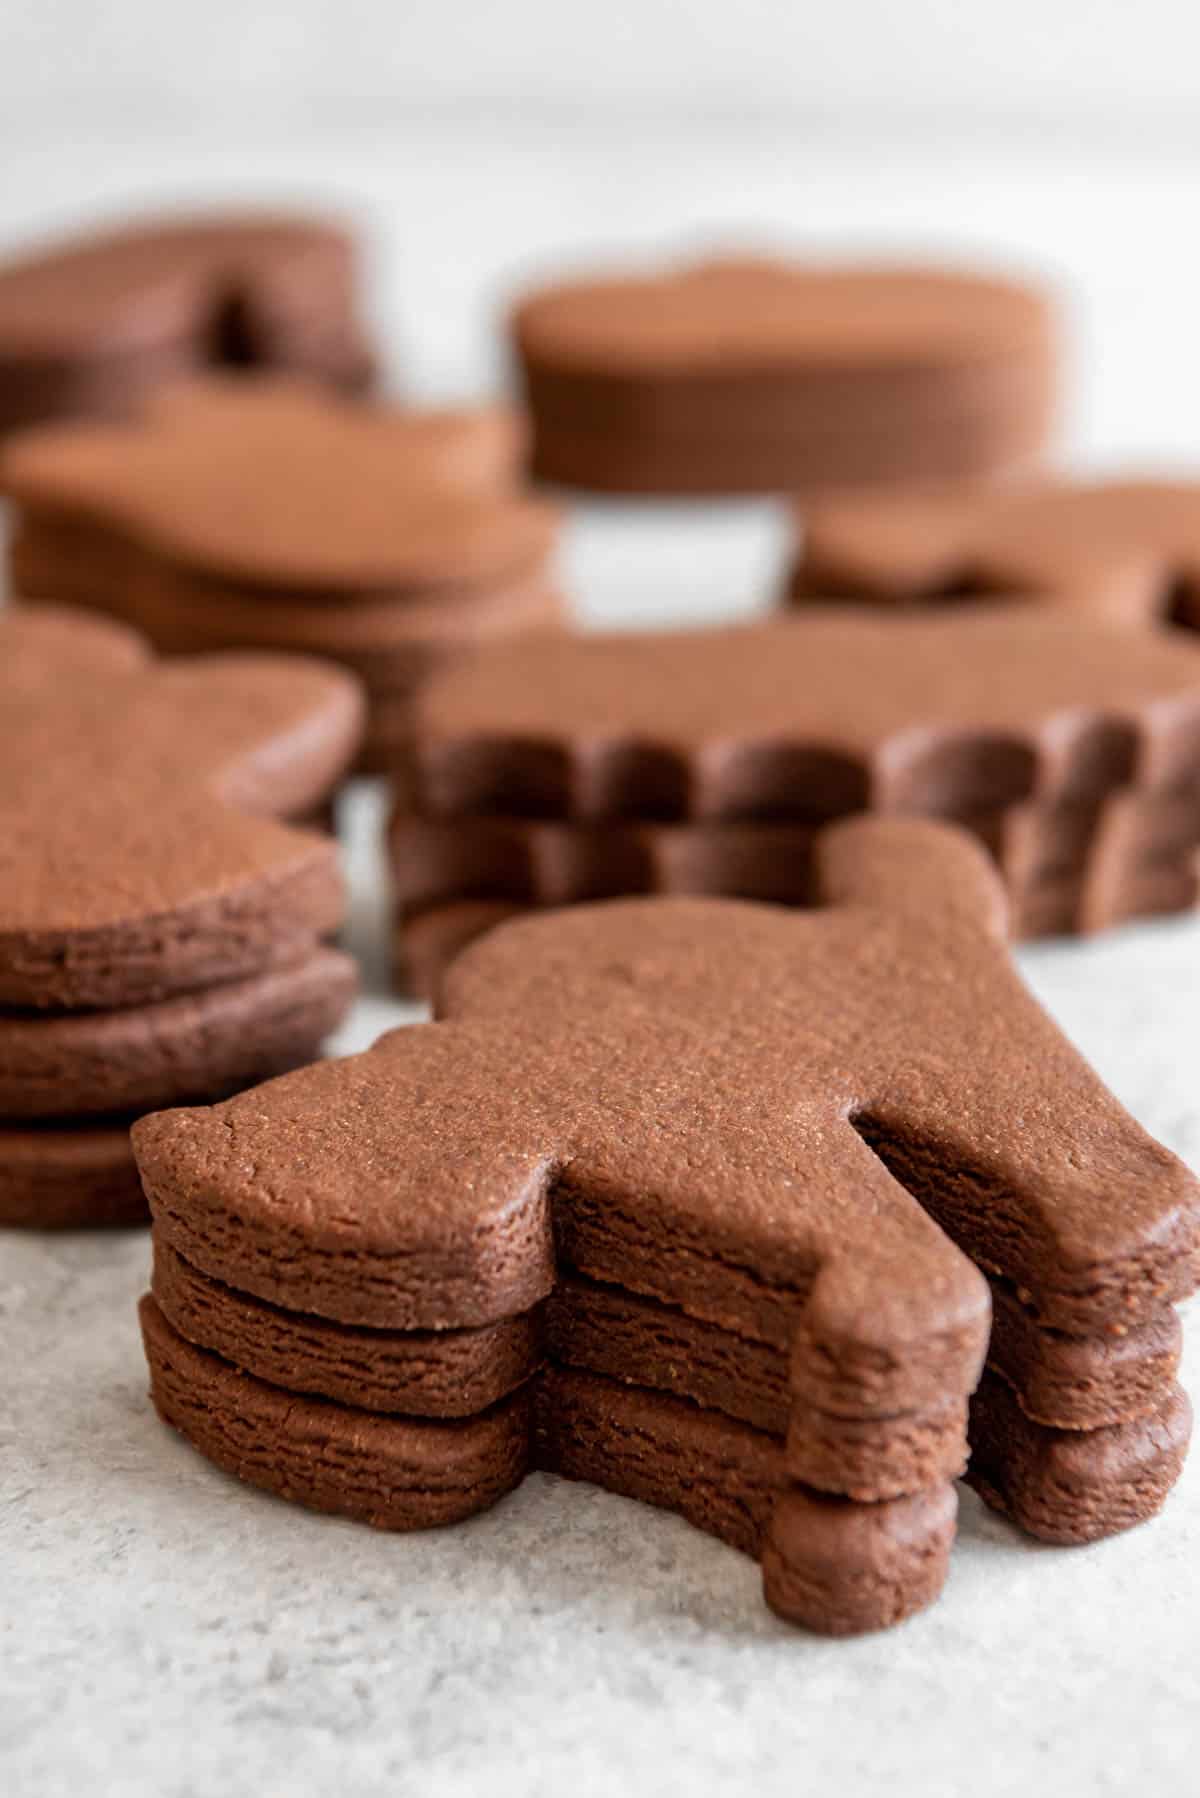 Stacks of chocolate cut out cookies in Halloween shapes.